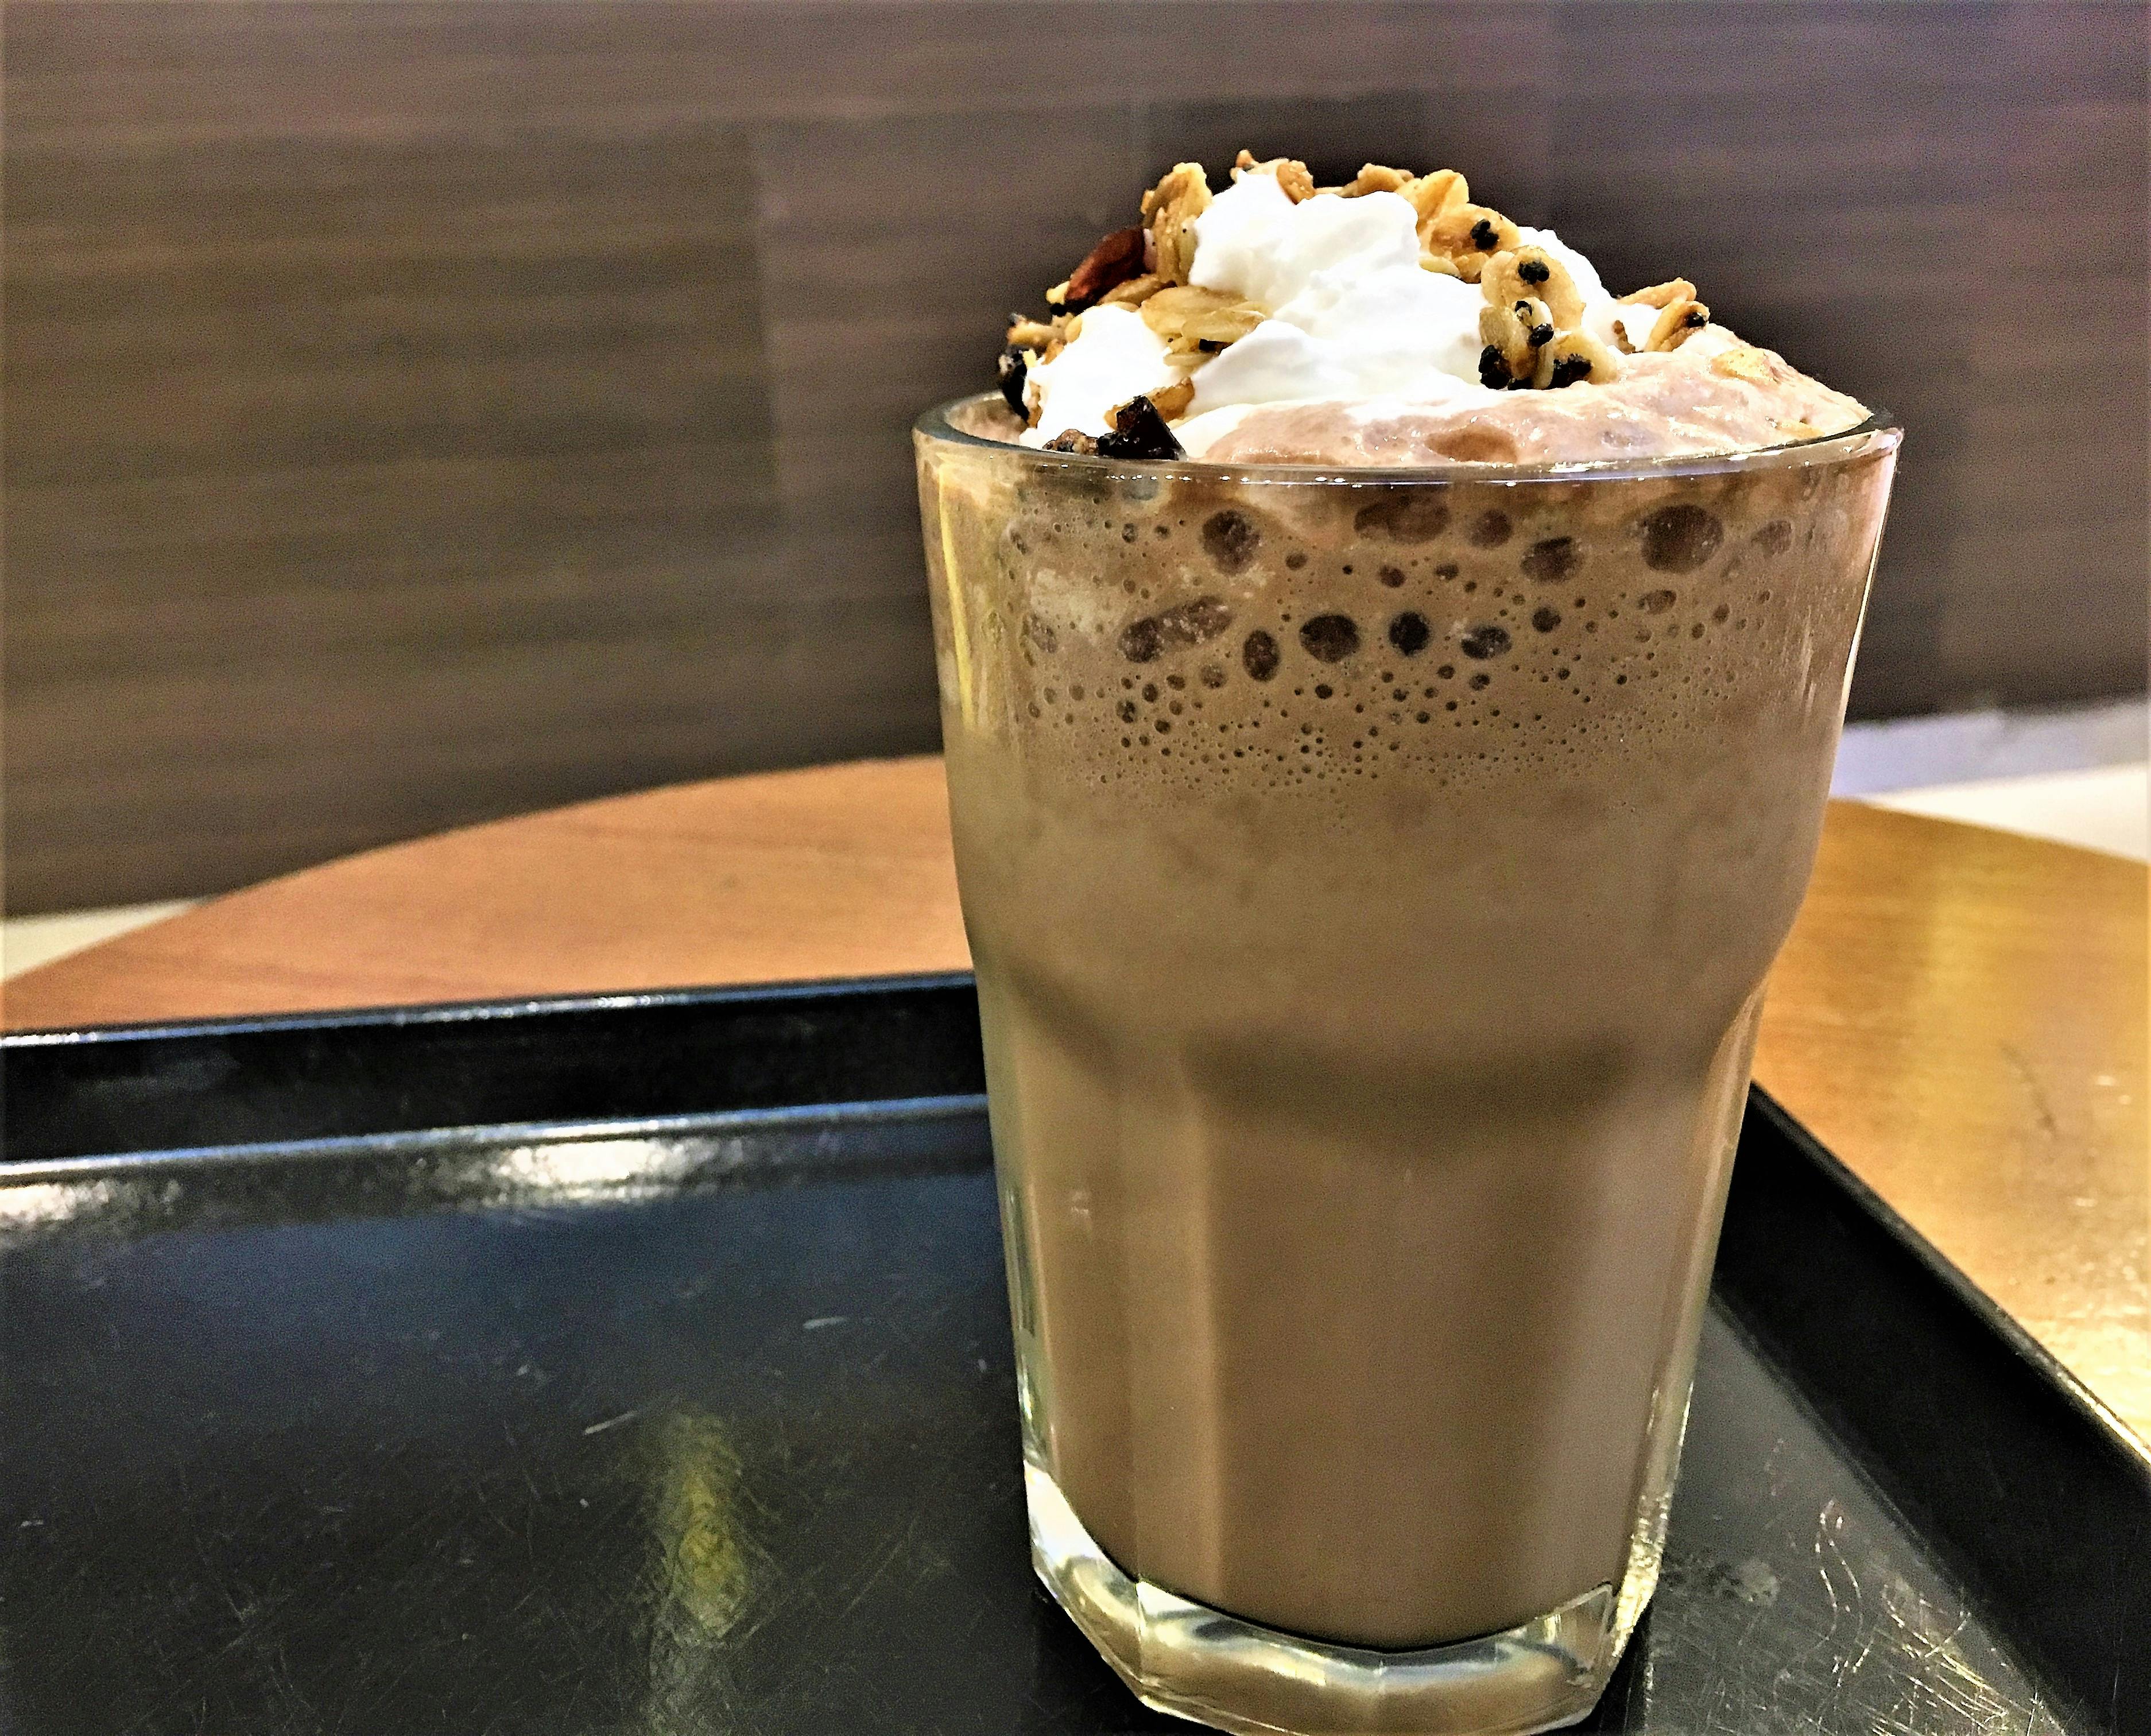 Free stock photo of Cold Chocolate milk shake with whipped cream nuts